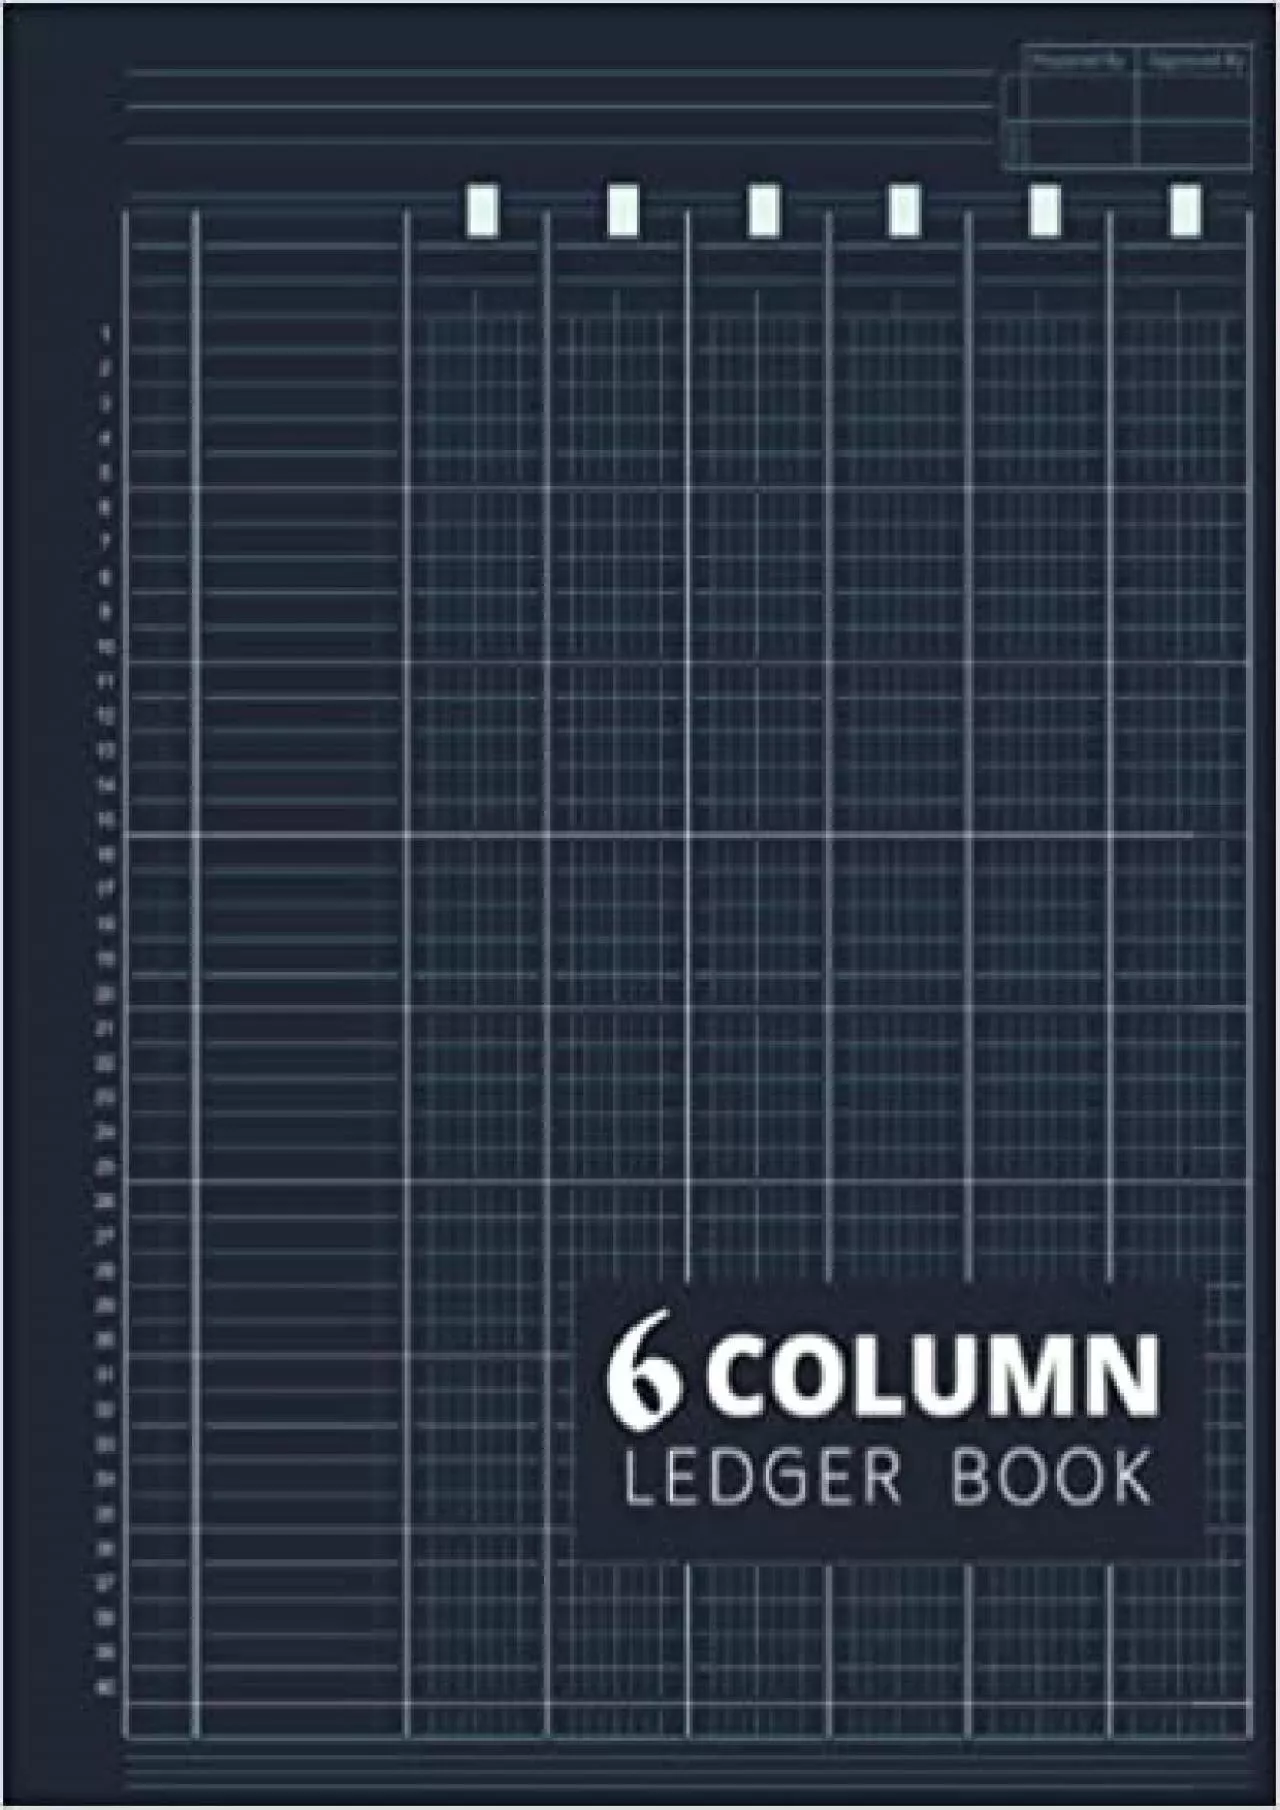 6 Column Ledger Book: Accounting Ledger Book / Income and Expense Log Book For Small Business